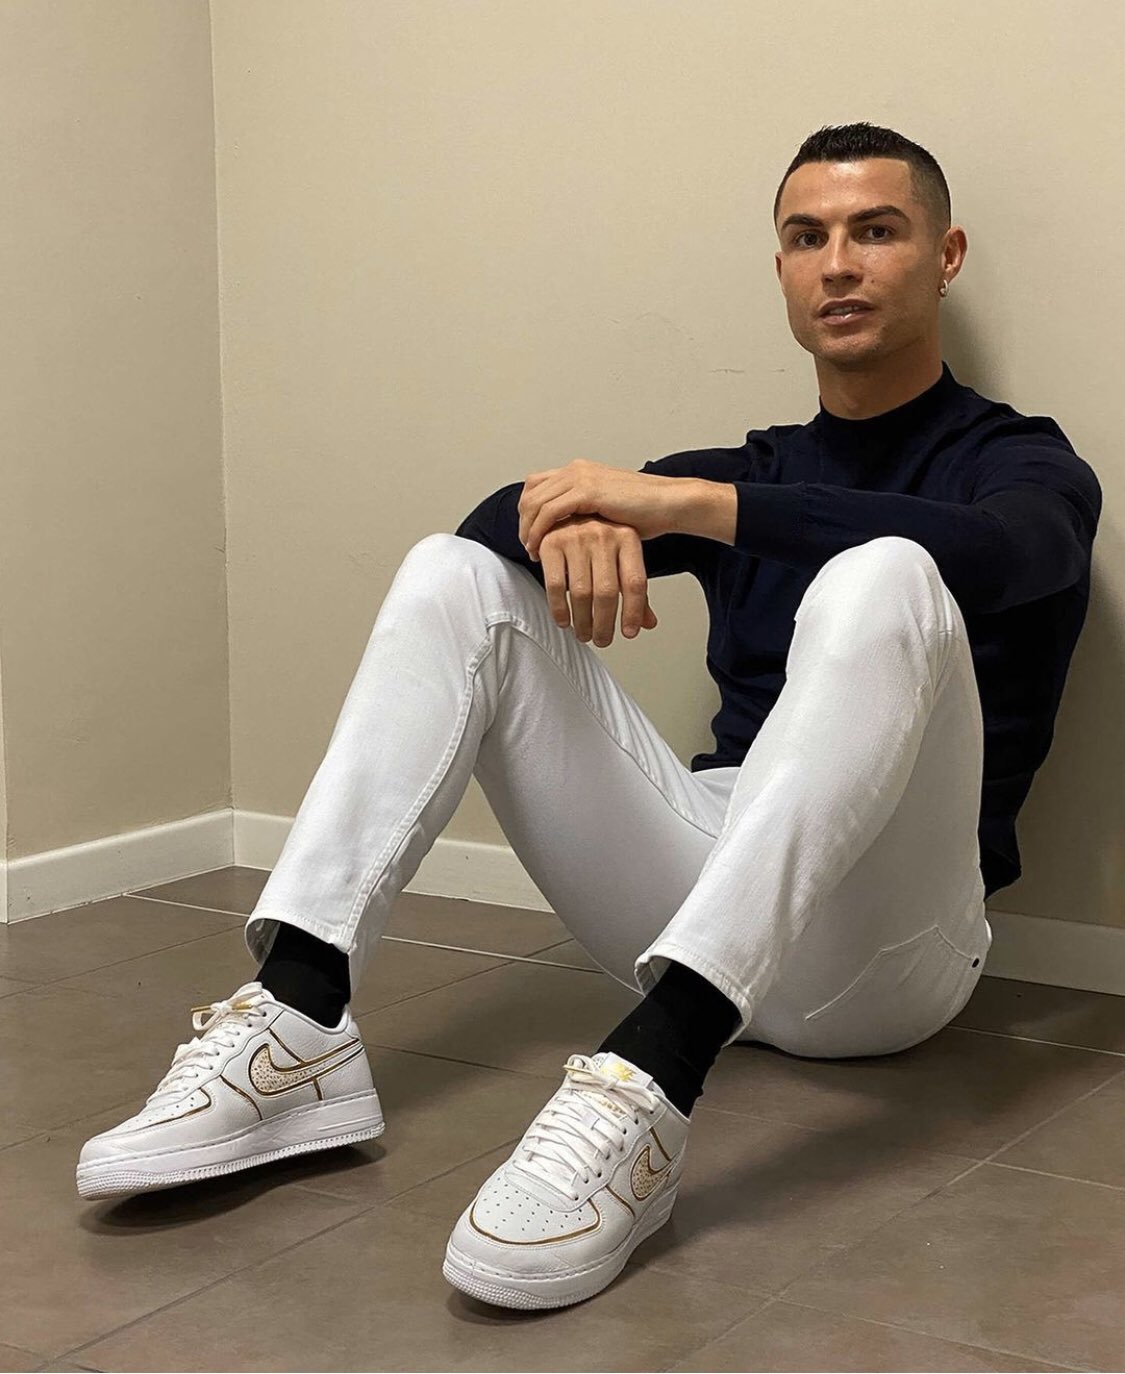 The CR7 Timeline. on X: 🎁 Cristiano Ronaldo with a gift from